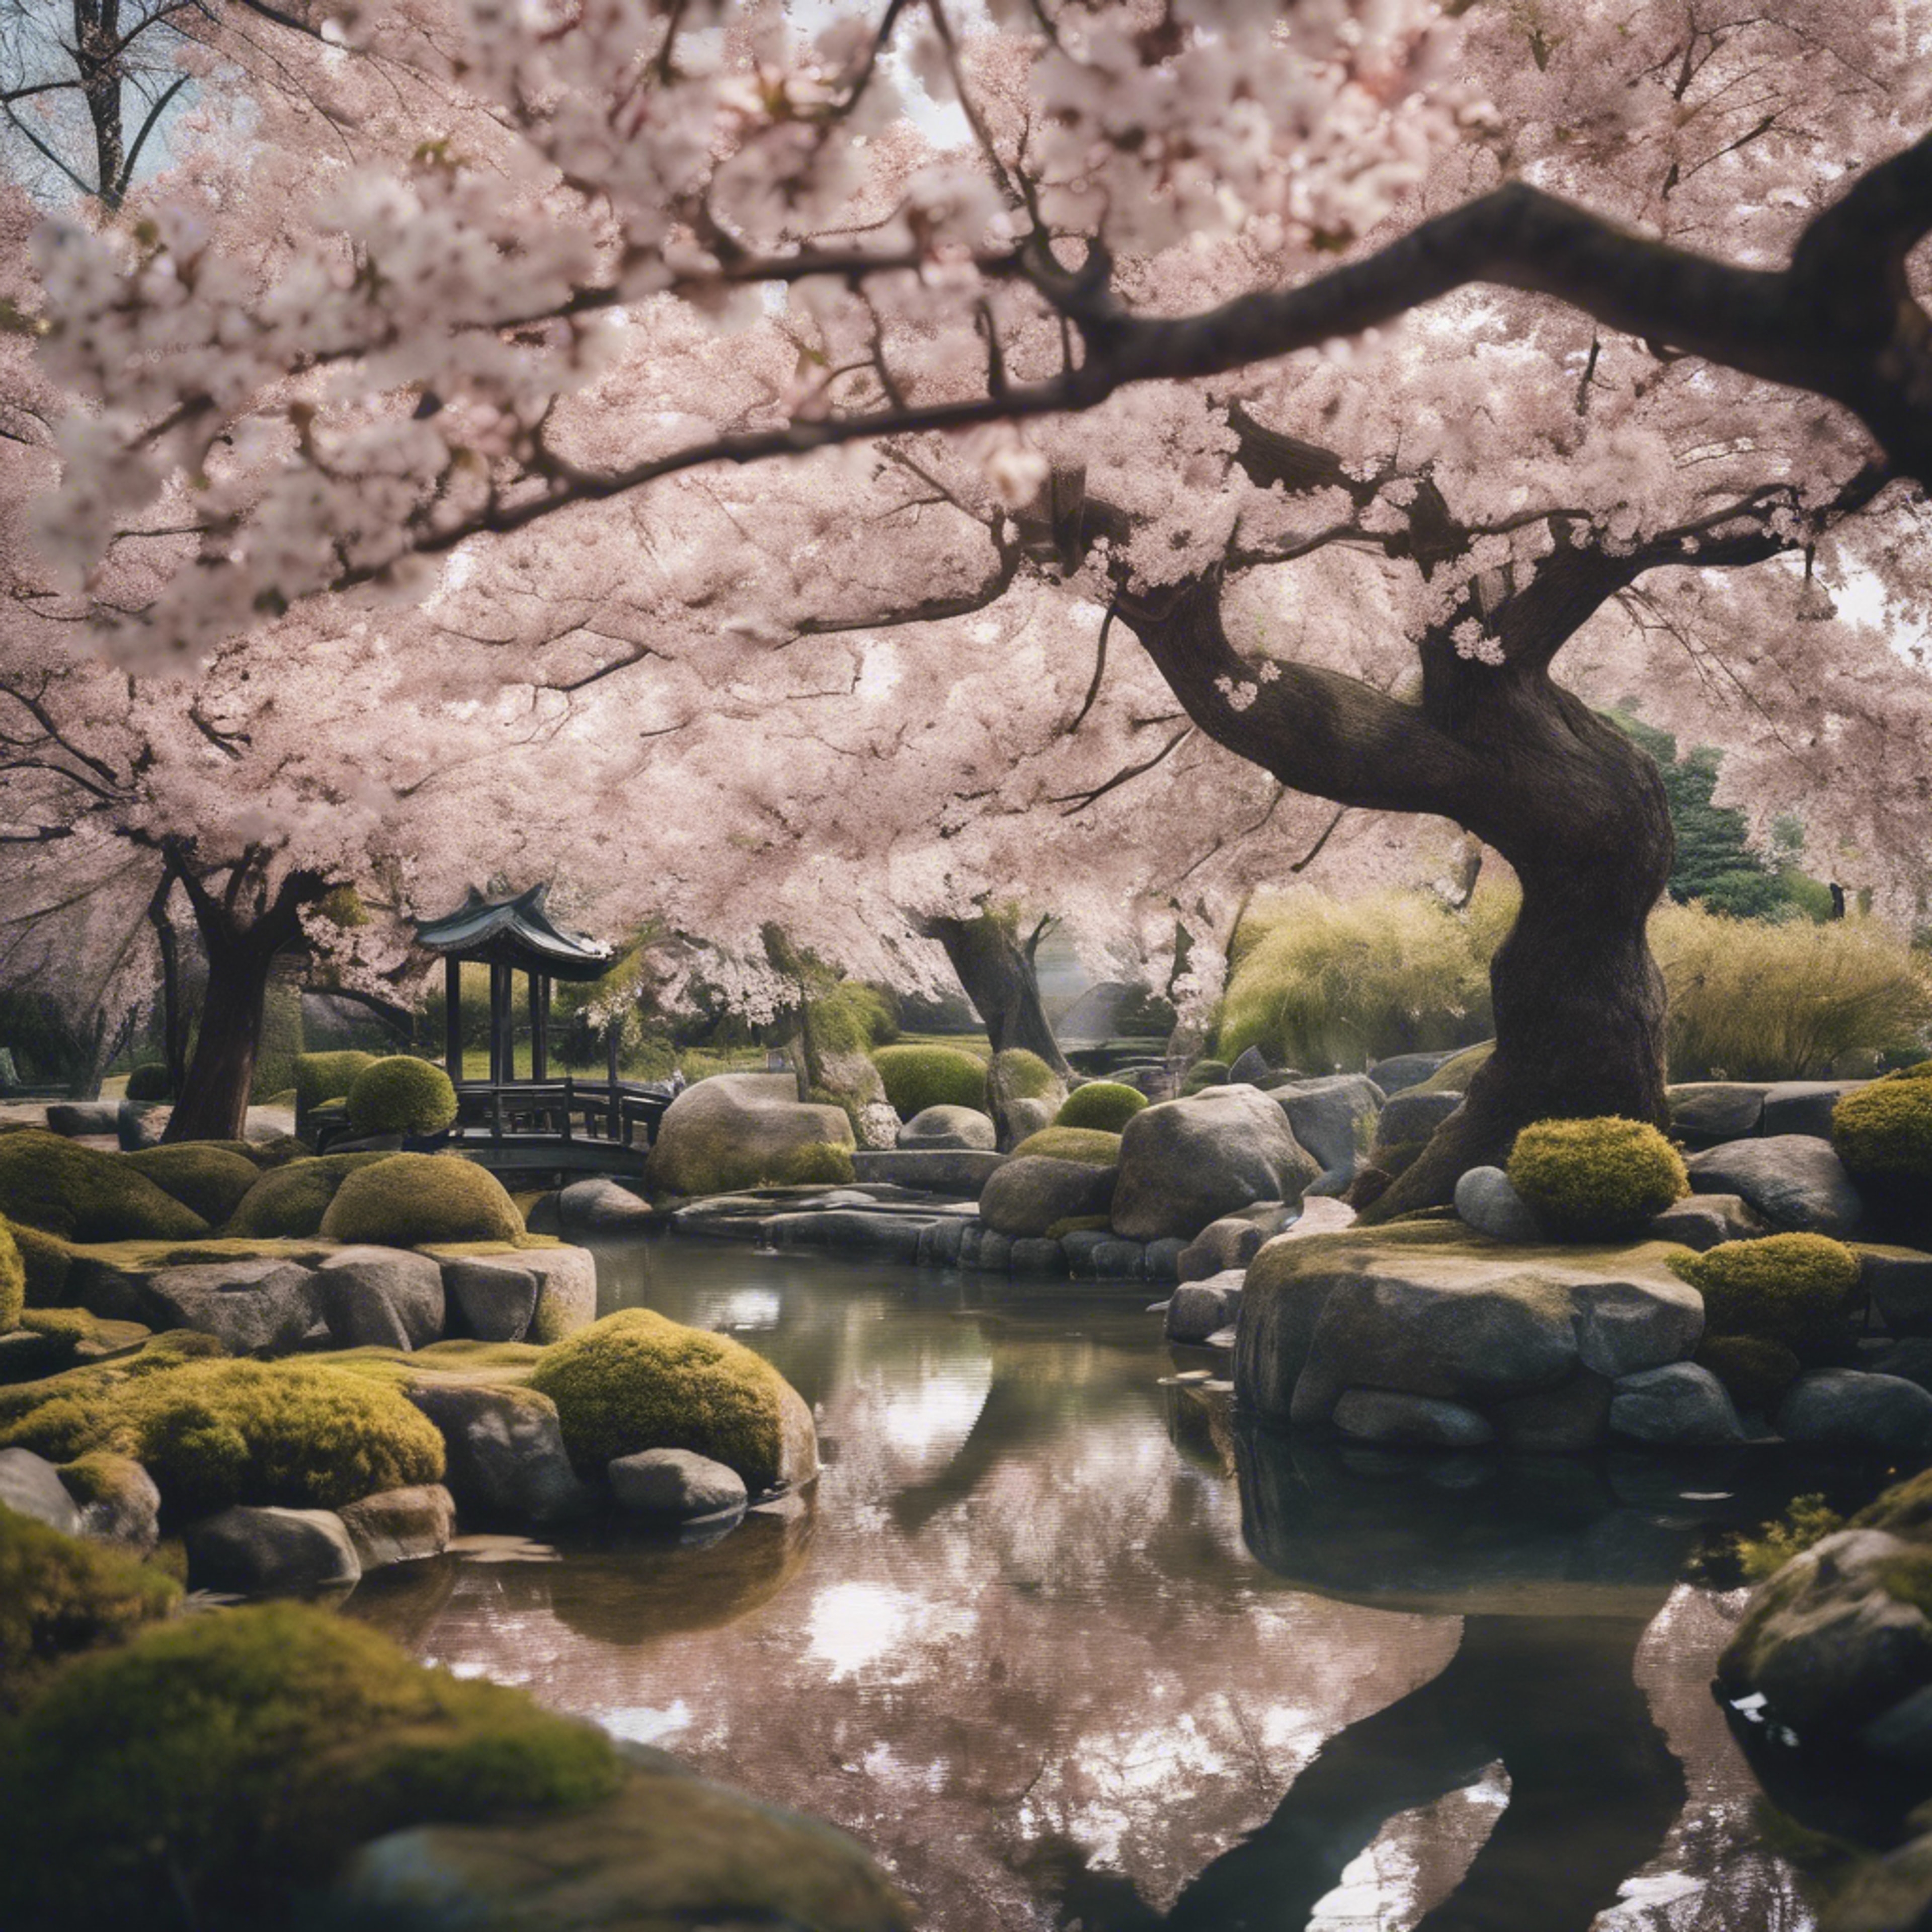 A wide-angle view of a serene Japanese garden with cherry blossoms in full bloom. Behang[cf6d4e9694a4479cb5ff]